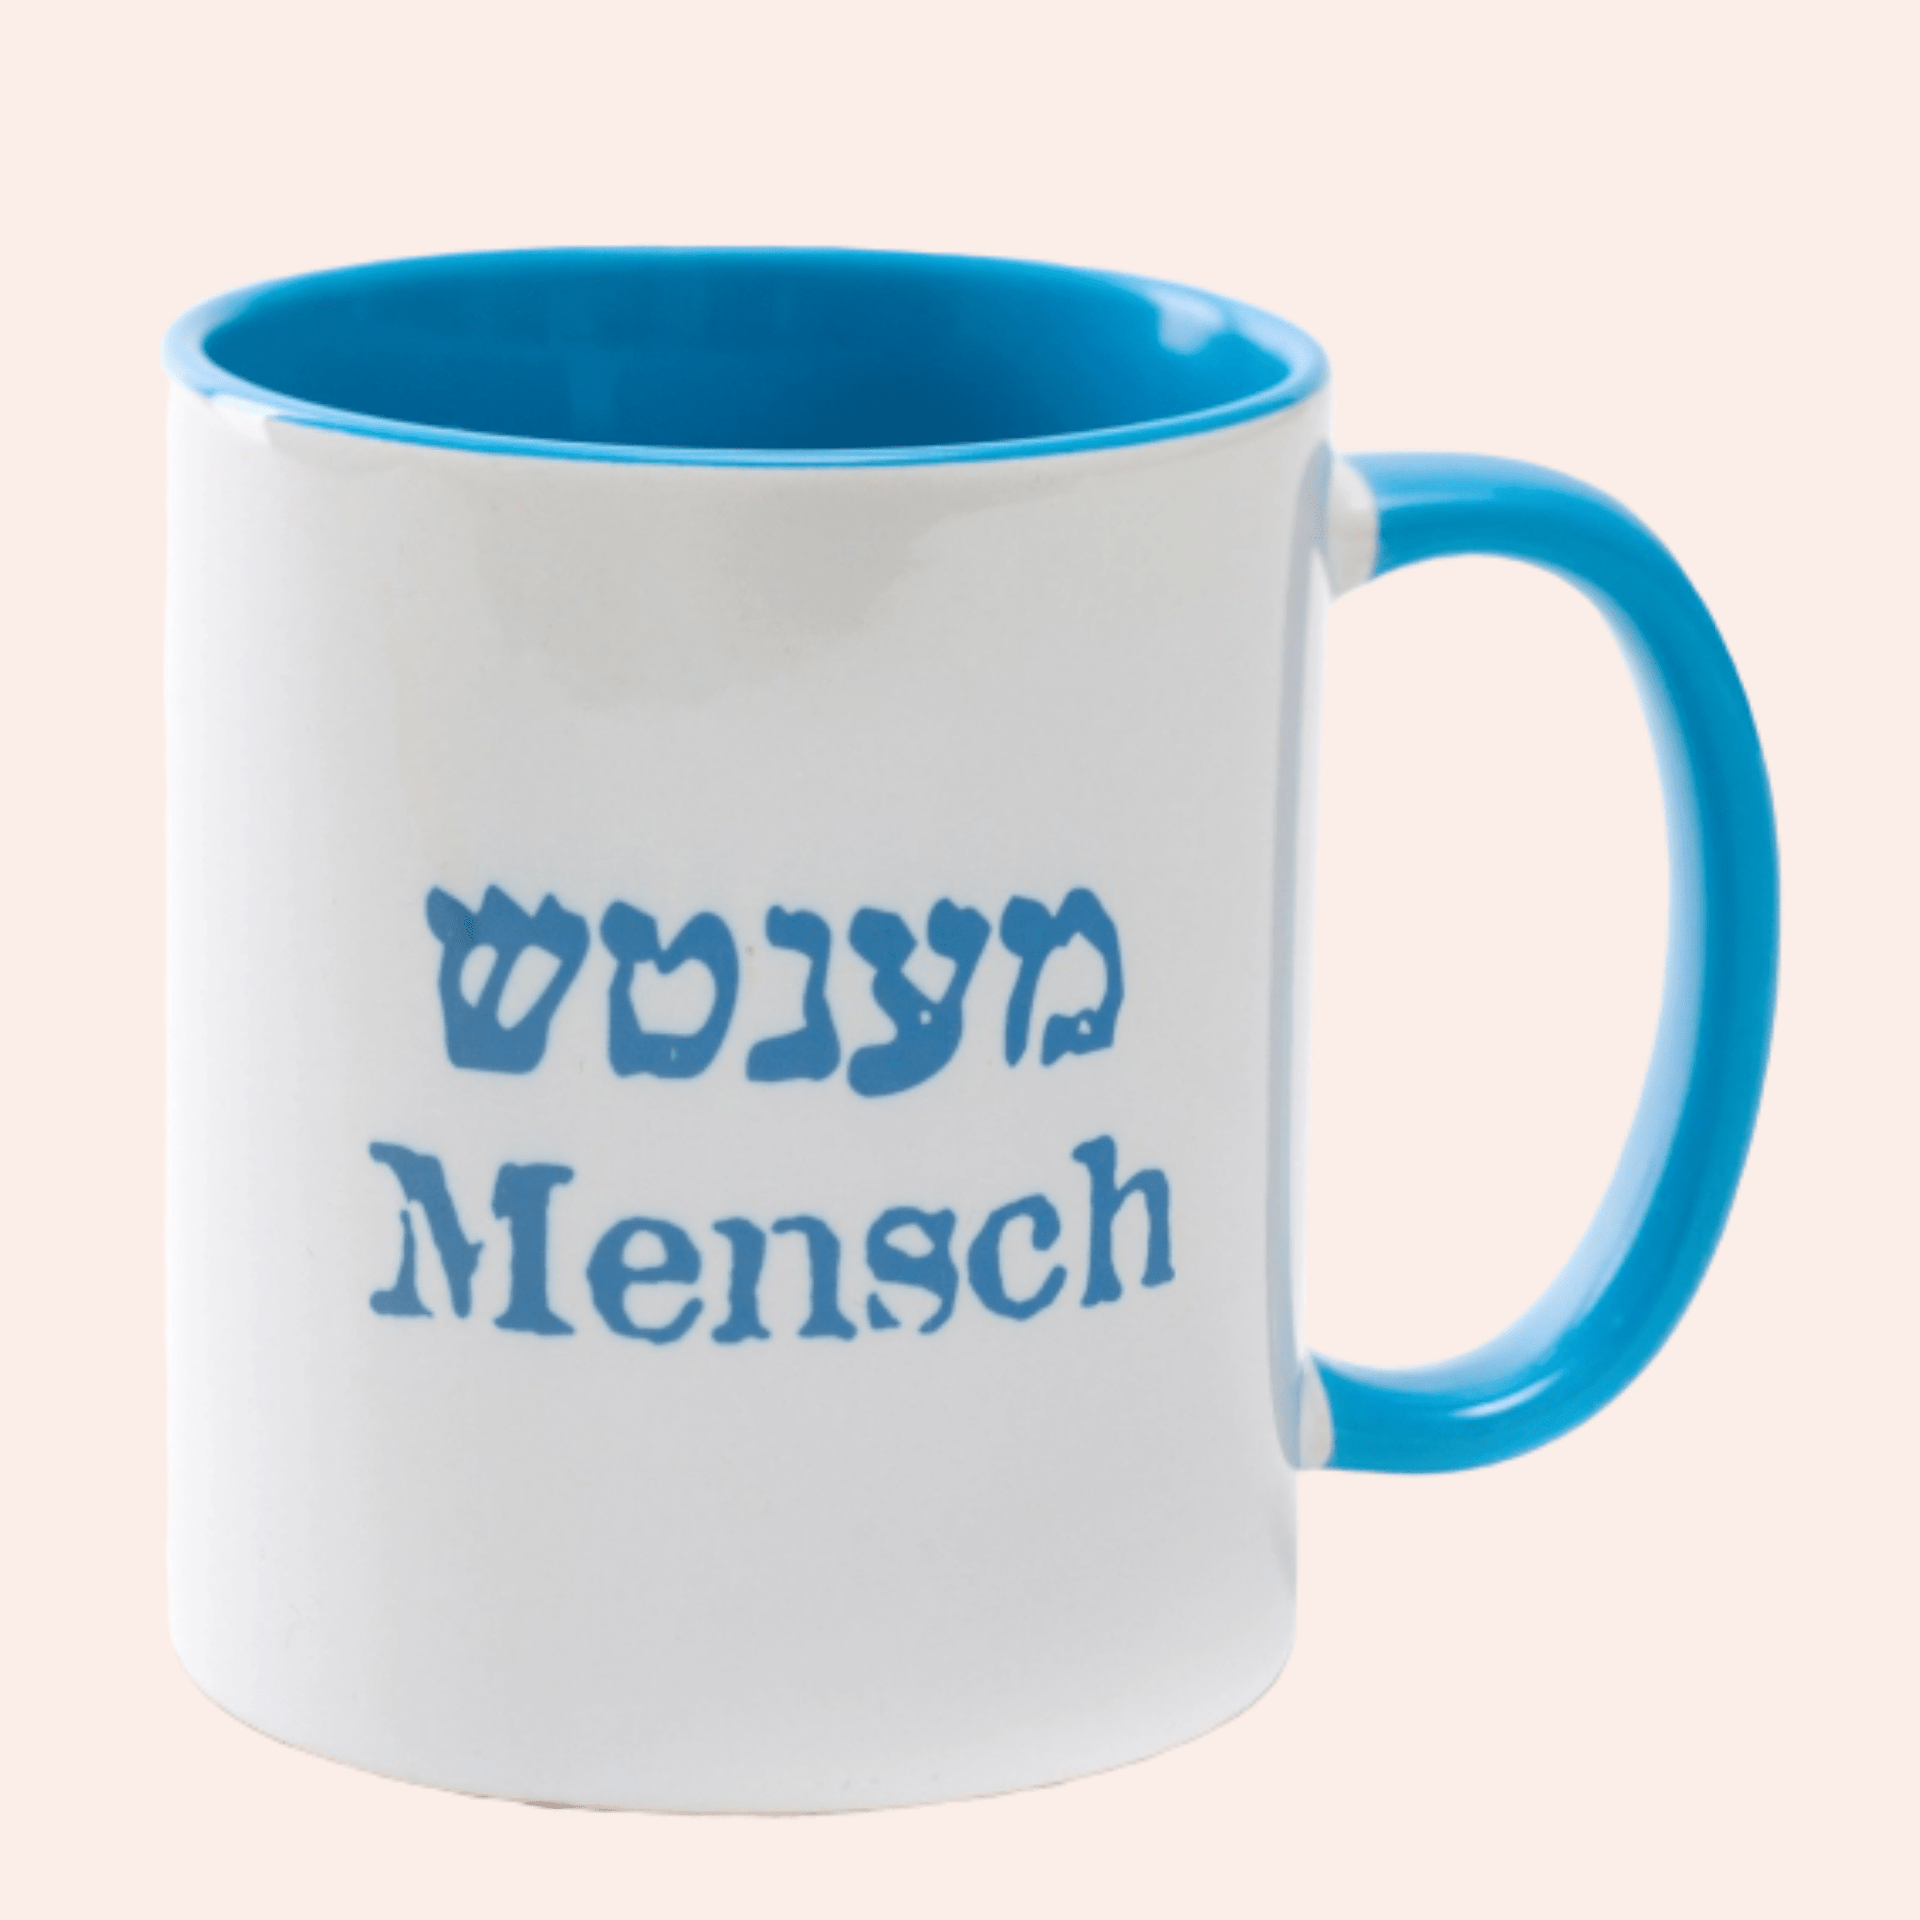 10 Best Selling Coffee Mugs for 2023 - The Jerusalem Post